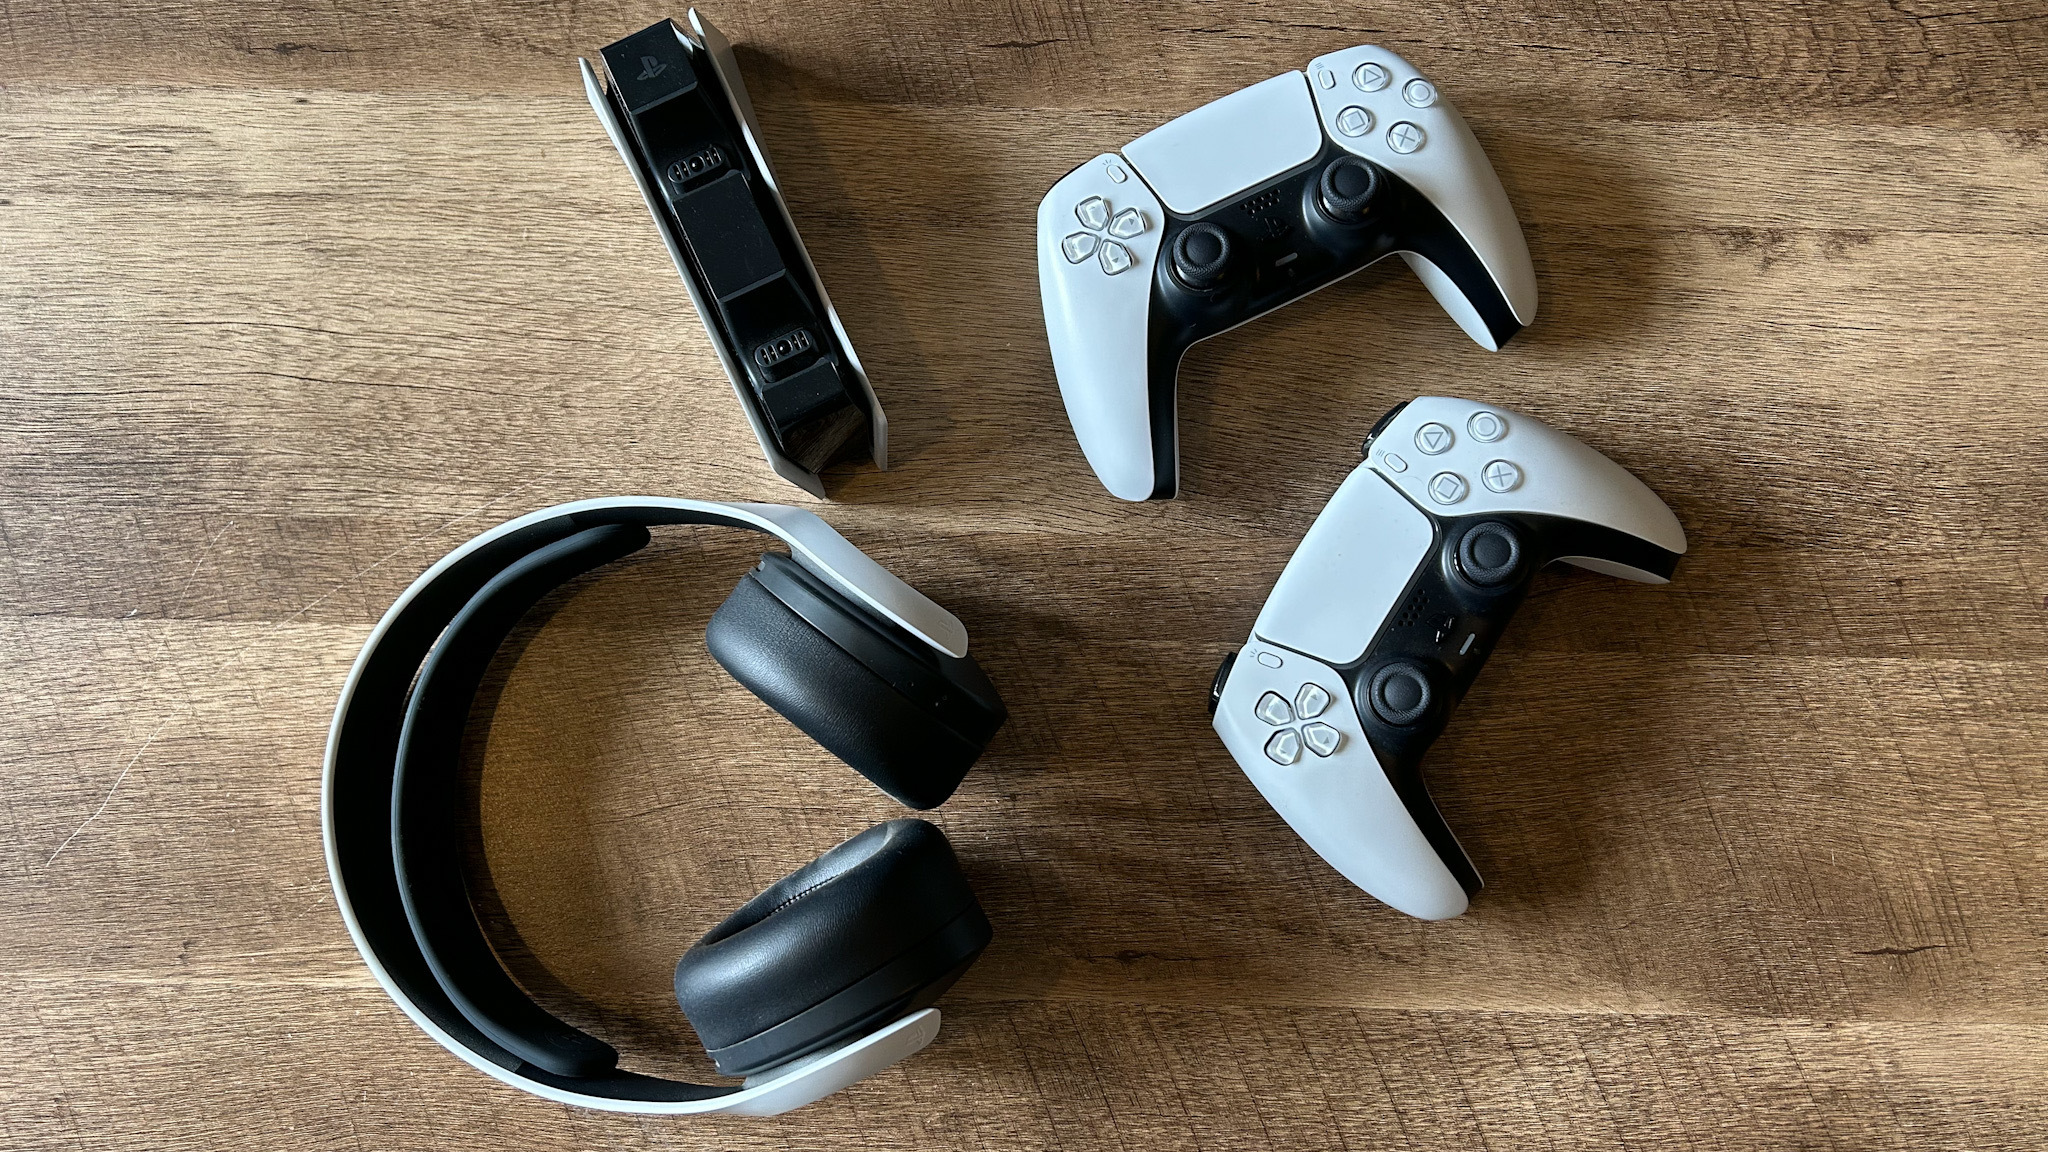 PS5 accessories on a table, including two DualSense controllers, a charging station and a headset